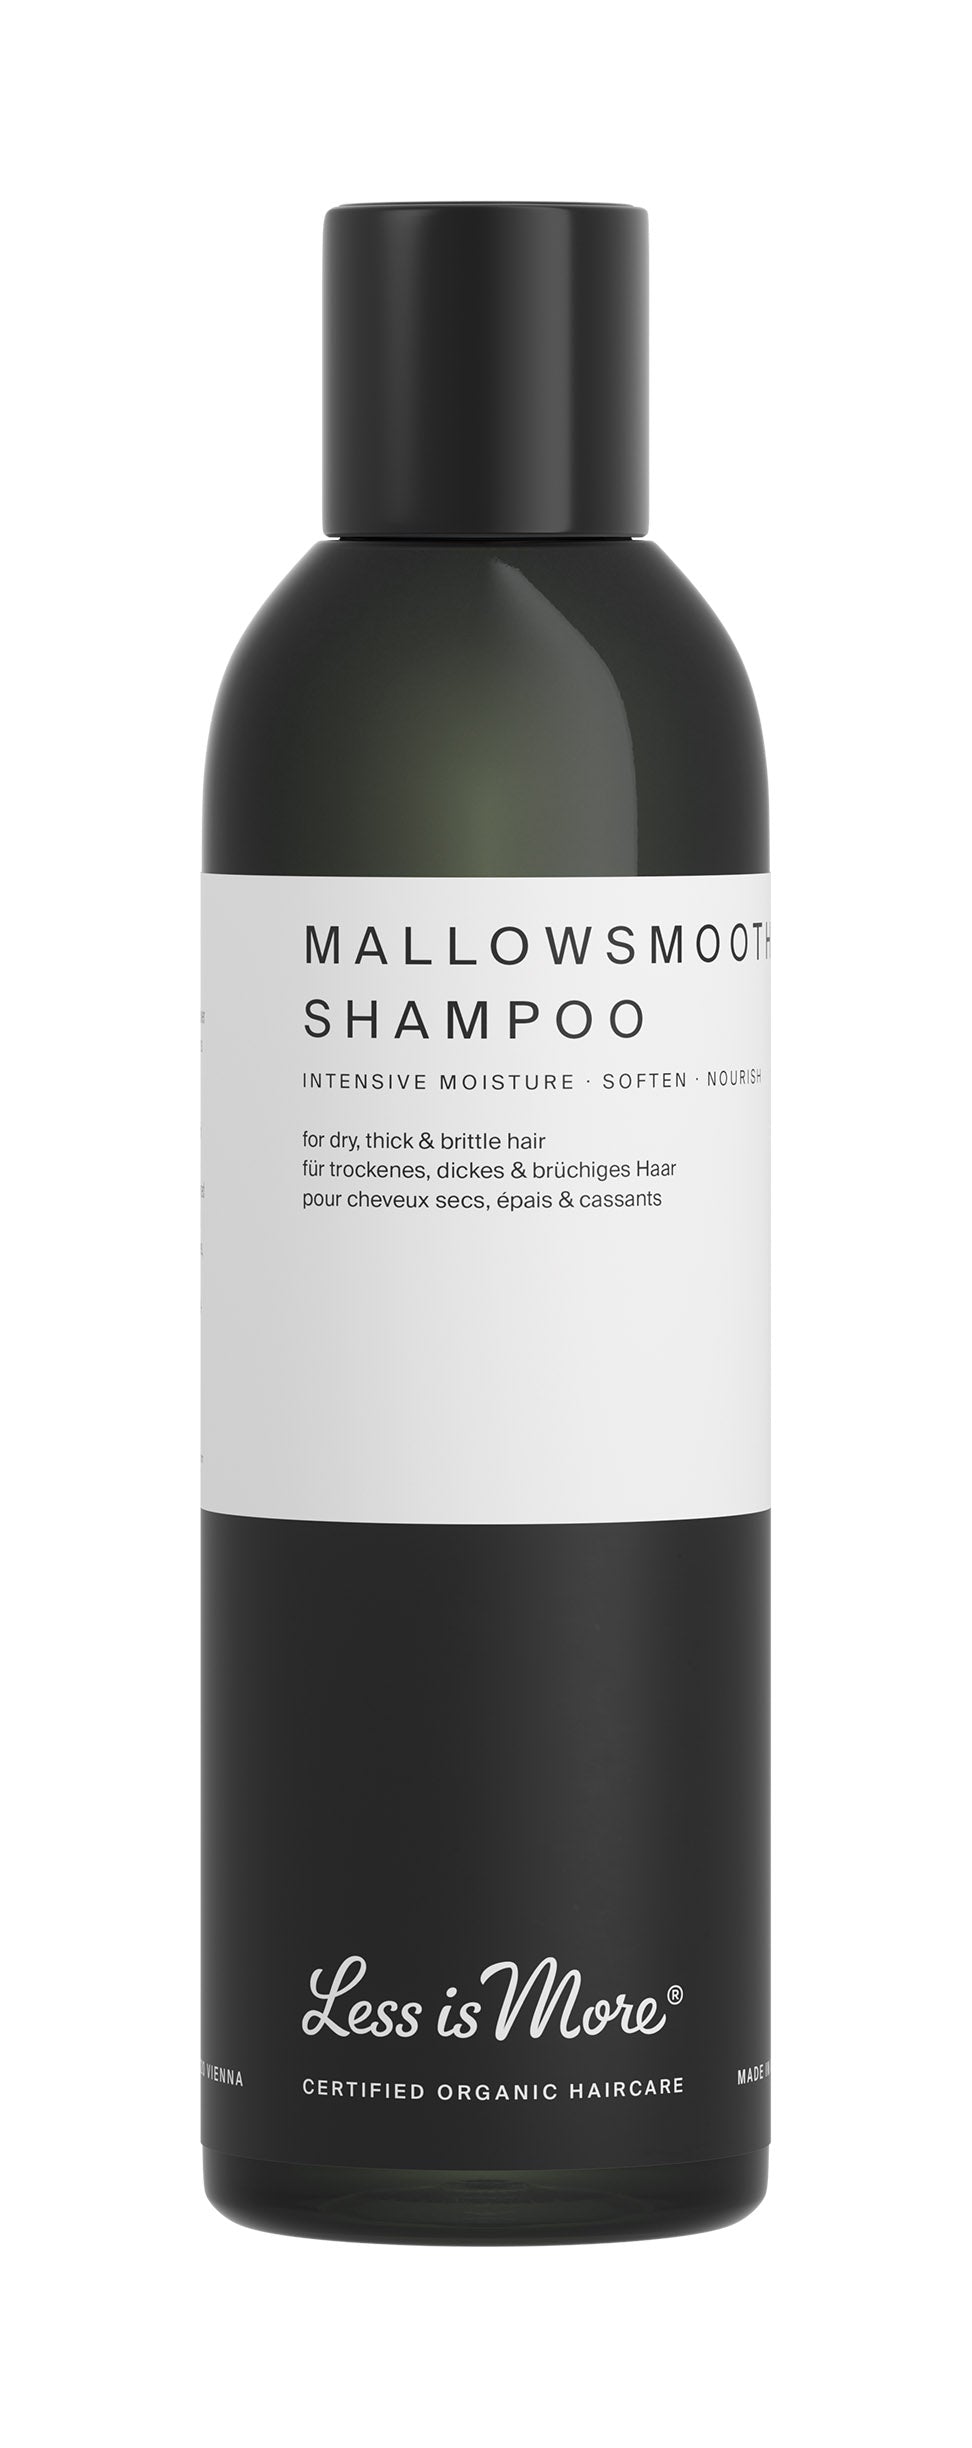 Less is More - Shampoo Mallowsmooth 200ml